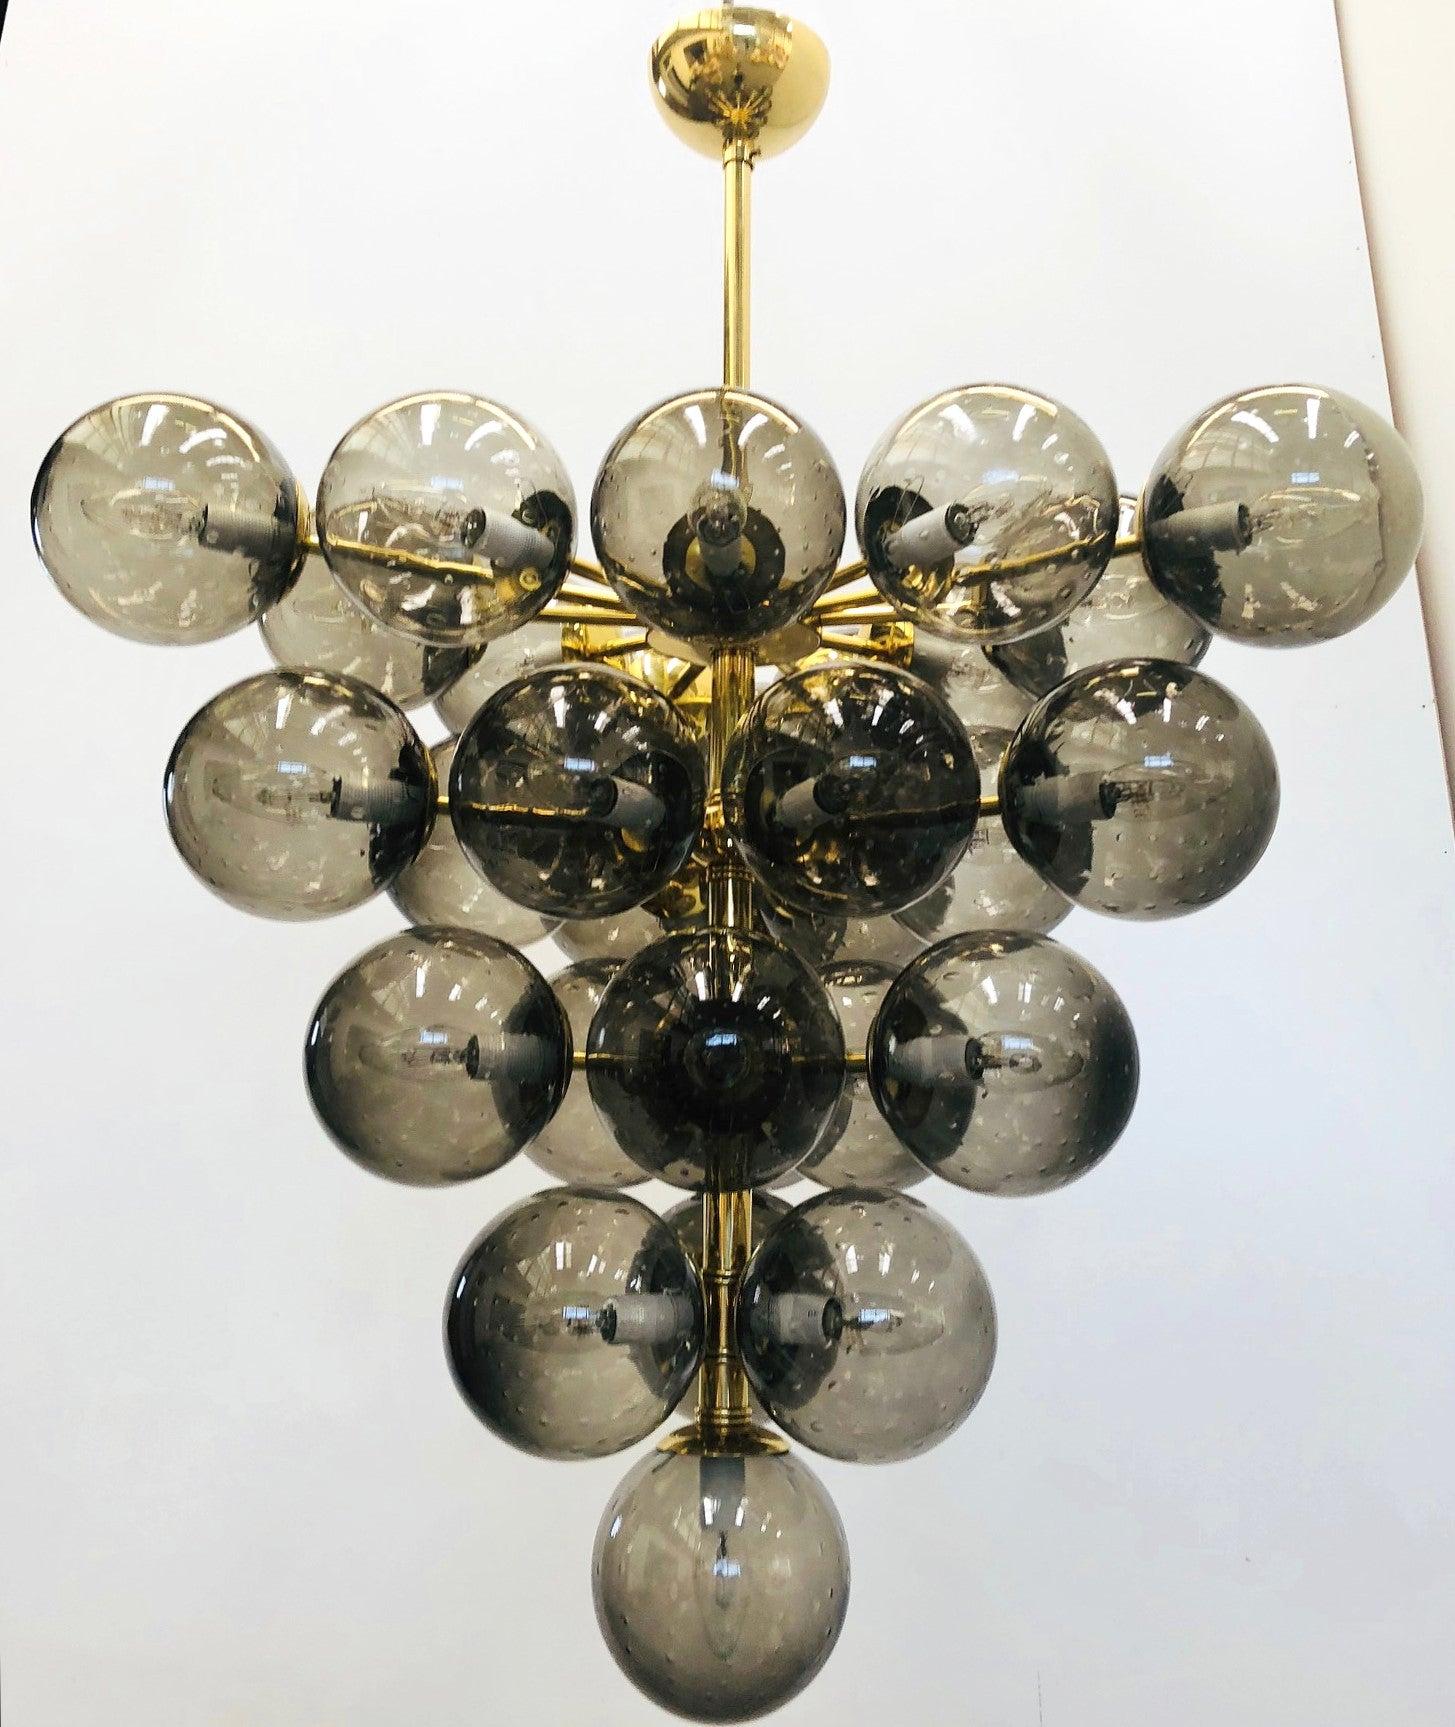 Italian chandelier with smoky Murano glass globes hand blown with bubbles inside the glass using Bollicine technique, mounted on polished brass frame / Designed by Fabio Bergomi for Fabio Ltd / Made in Italy
31-light / E12 or E14 type / max 40W